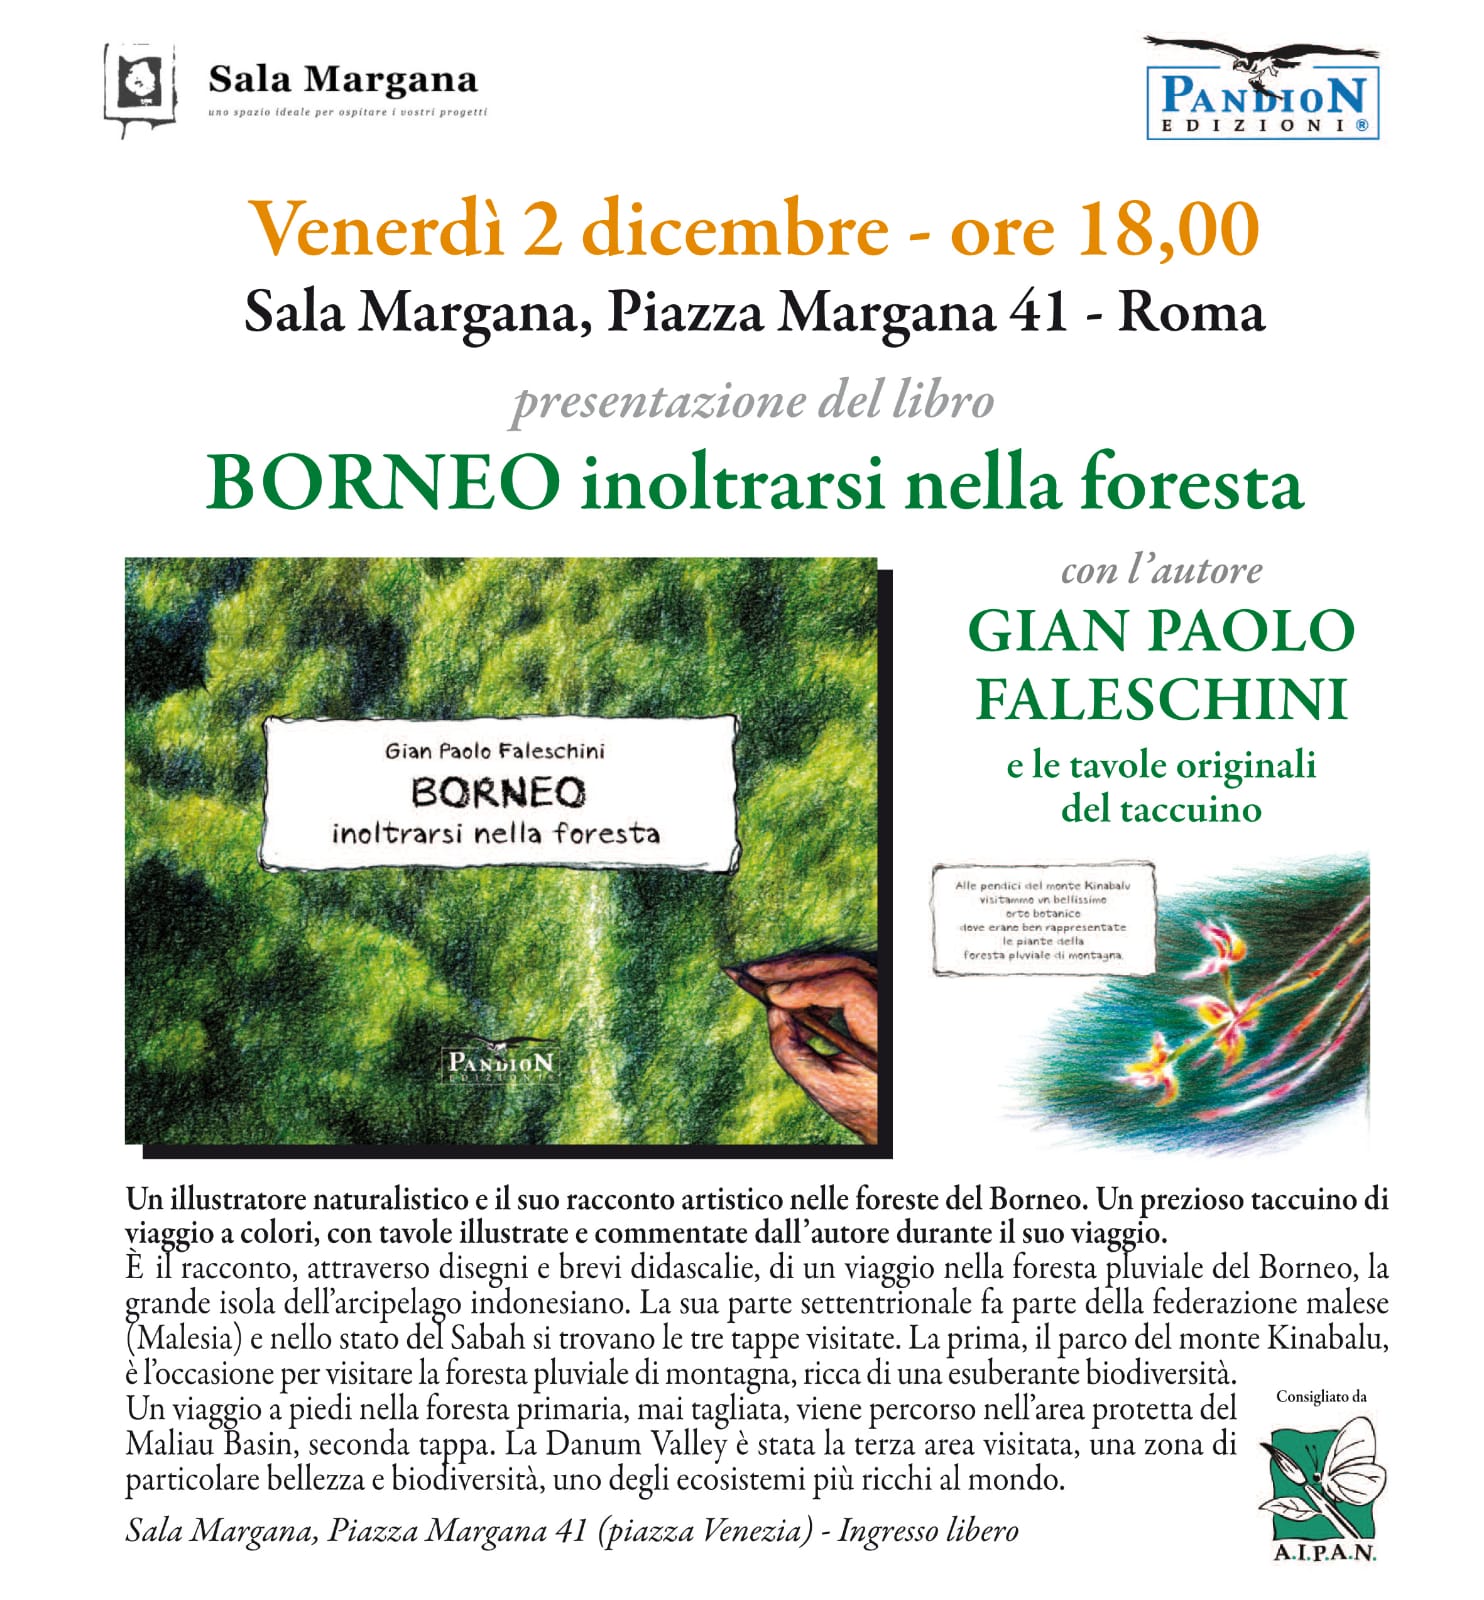 Friday 2 December 2022 at 6 PM, at Sala Margana in Piazza Margana 41 in Rome, author Gian Paolo Faleschini will present his new book BORNEO inoltrarsi nella foresta